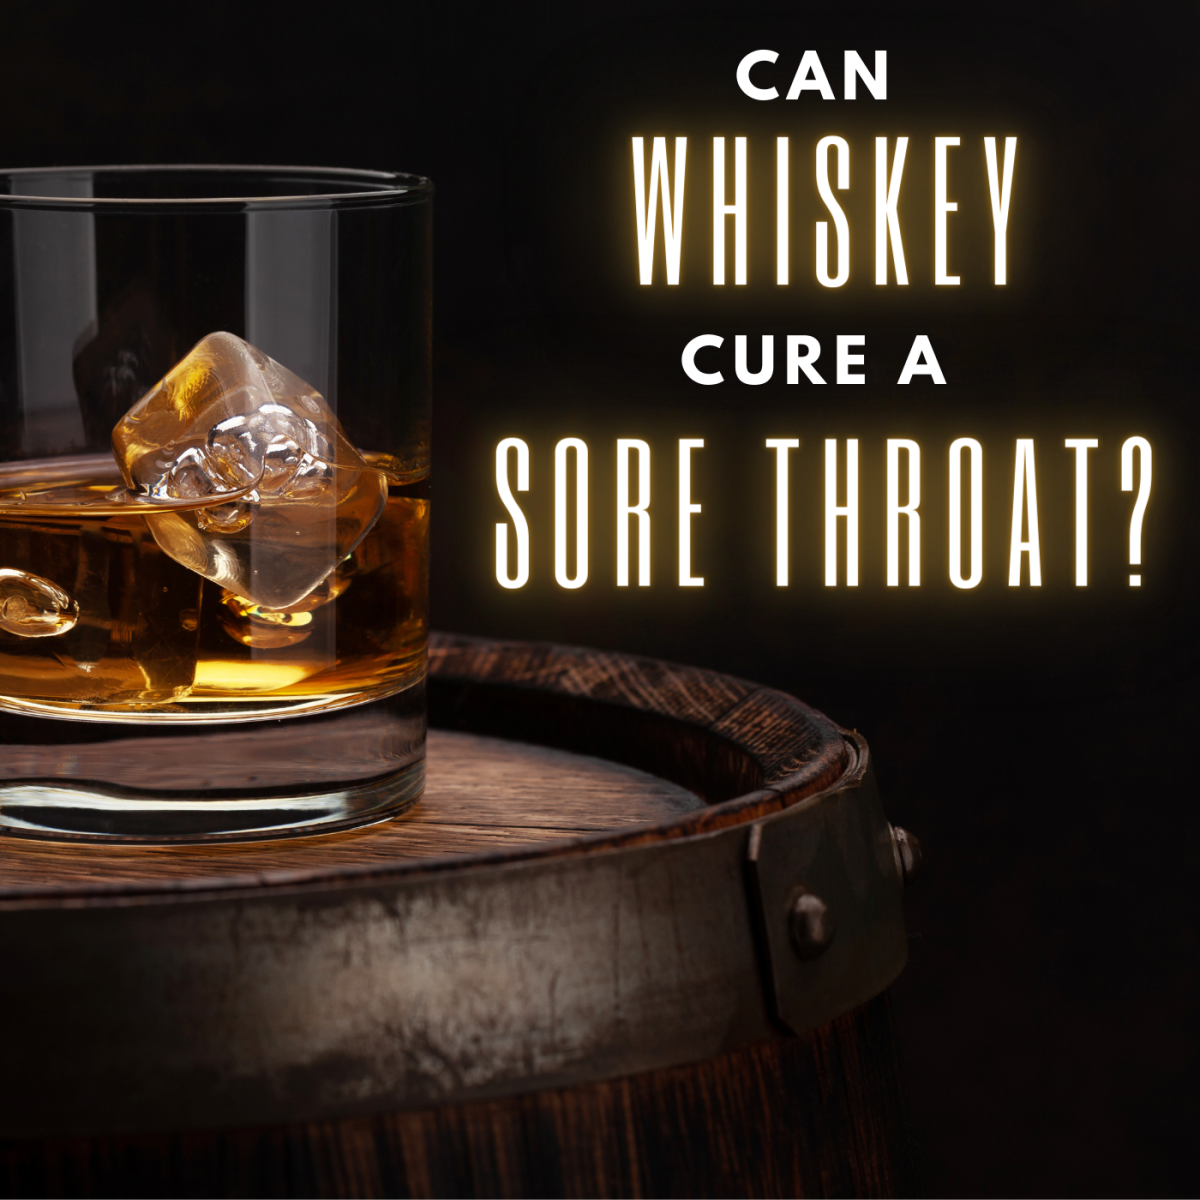 Can Whiskey Help Cure a Sore Throat?